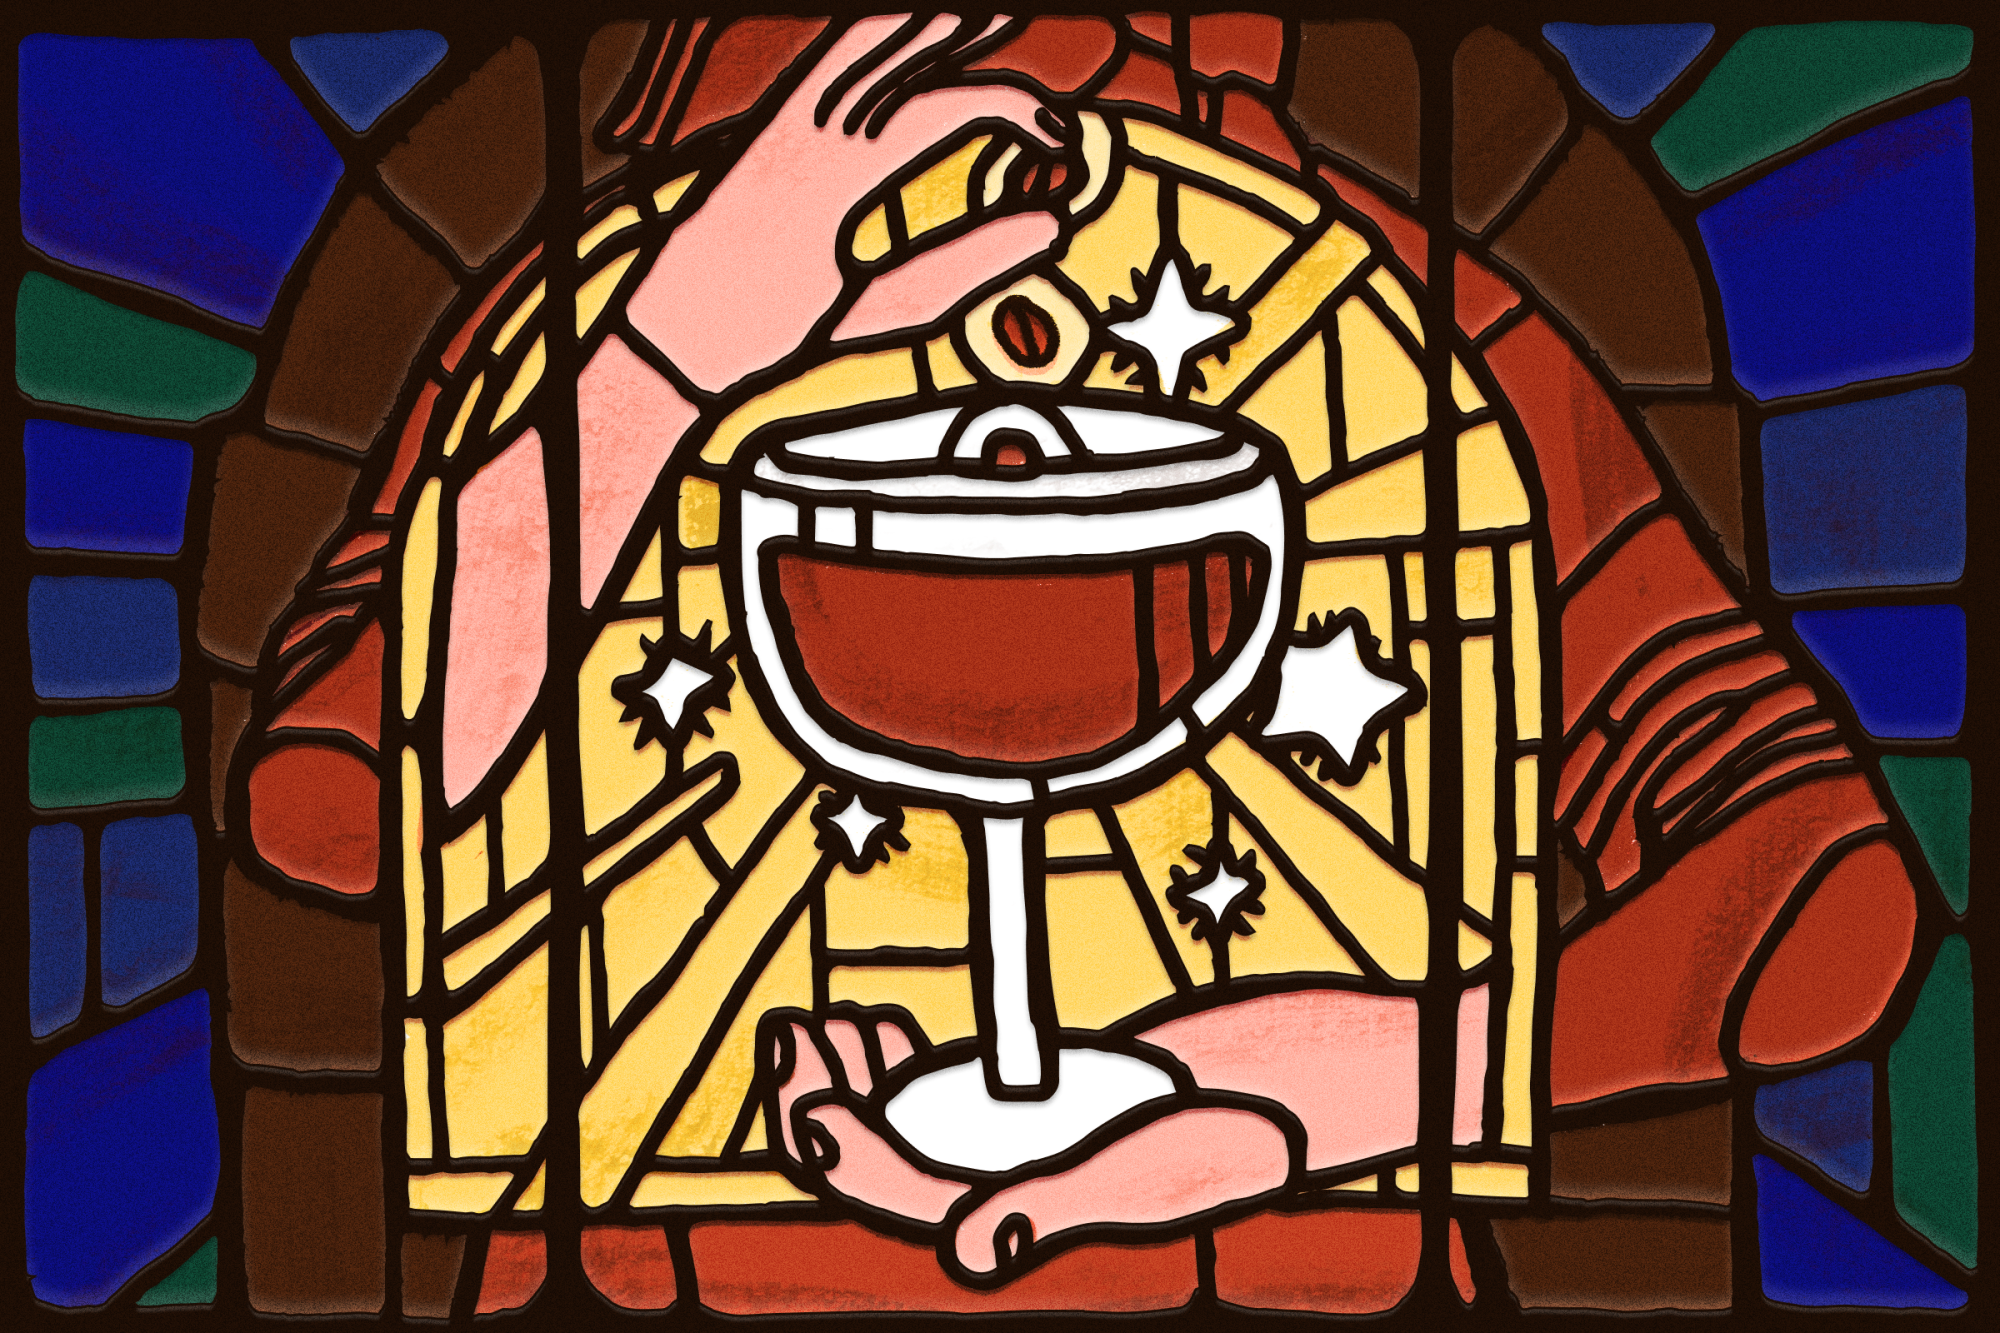 An illustration in stained-glass style of an espresso martini